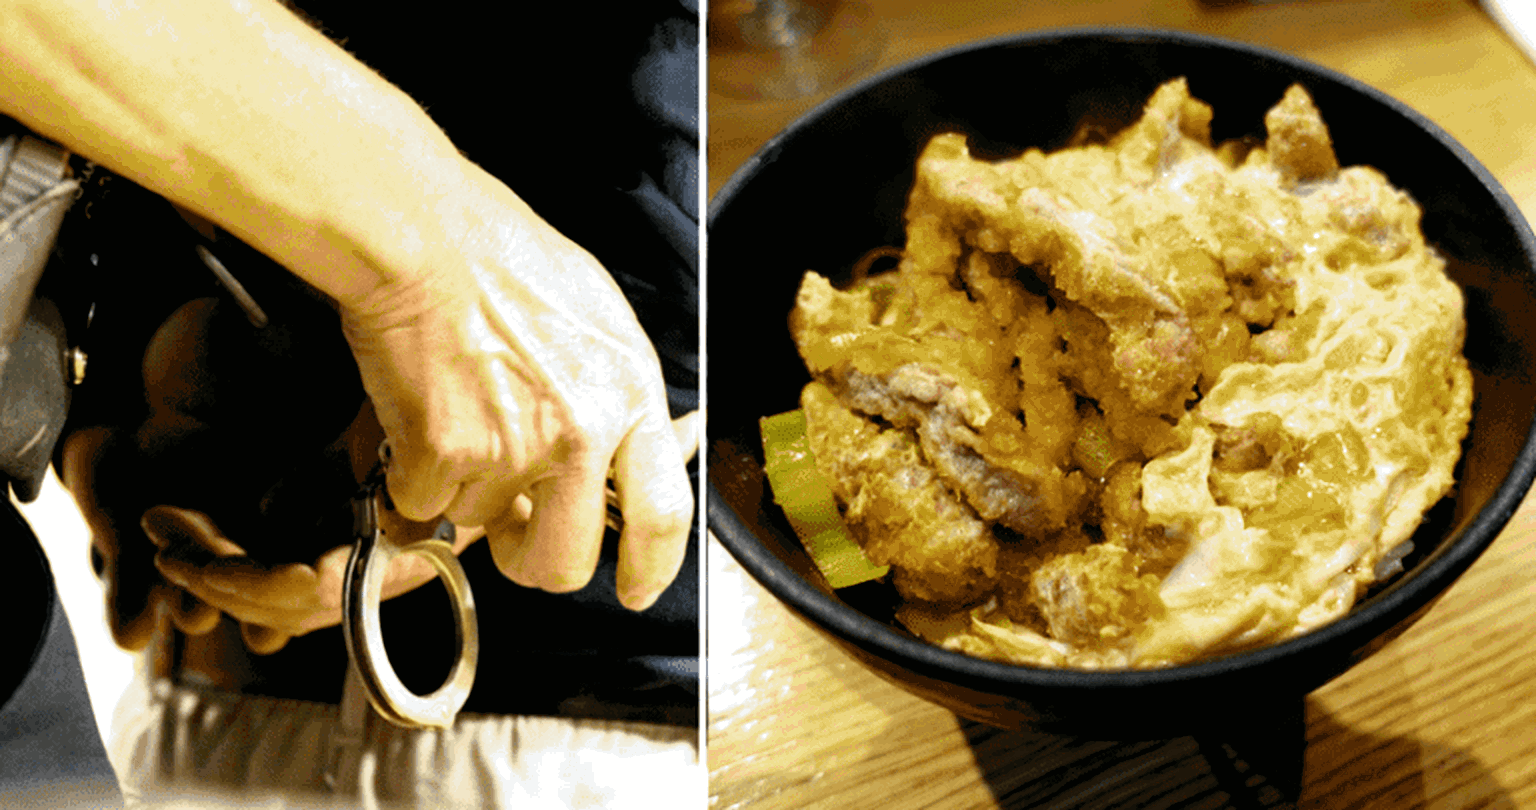 Japanese Man Calls Cops On Himself After Not Having Enough Money to Pay For Meal